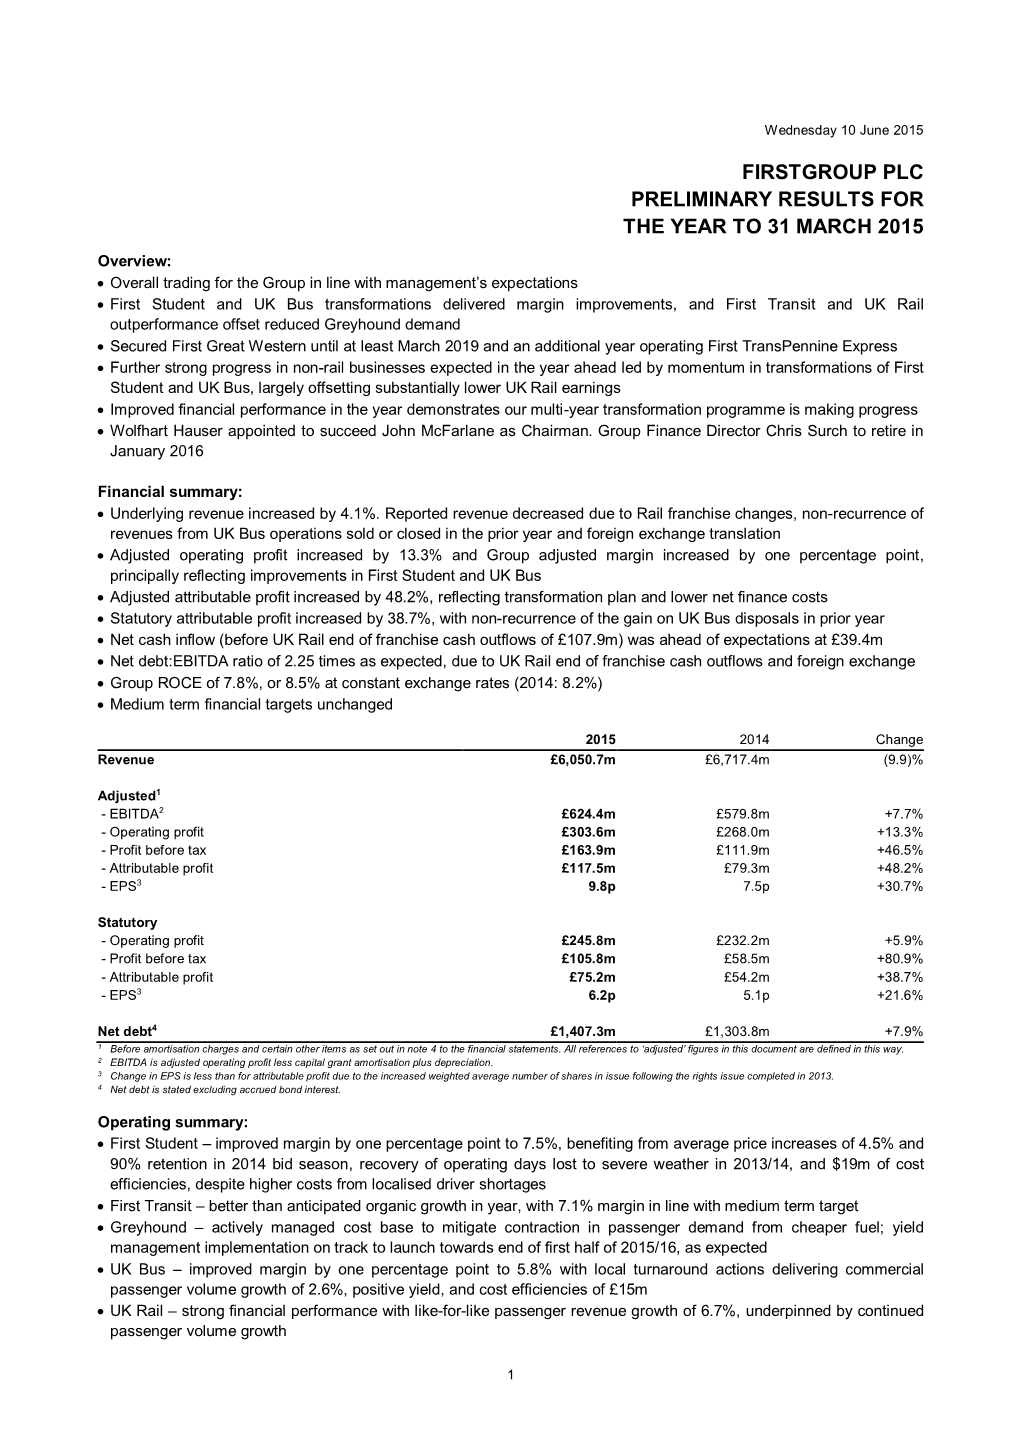 Firstgroup Plc Preliminary Results for the Year to 31 March 2015